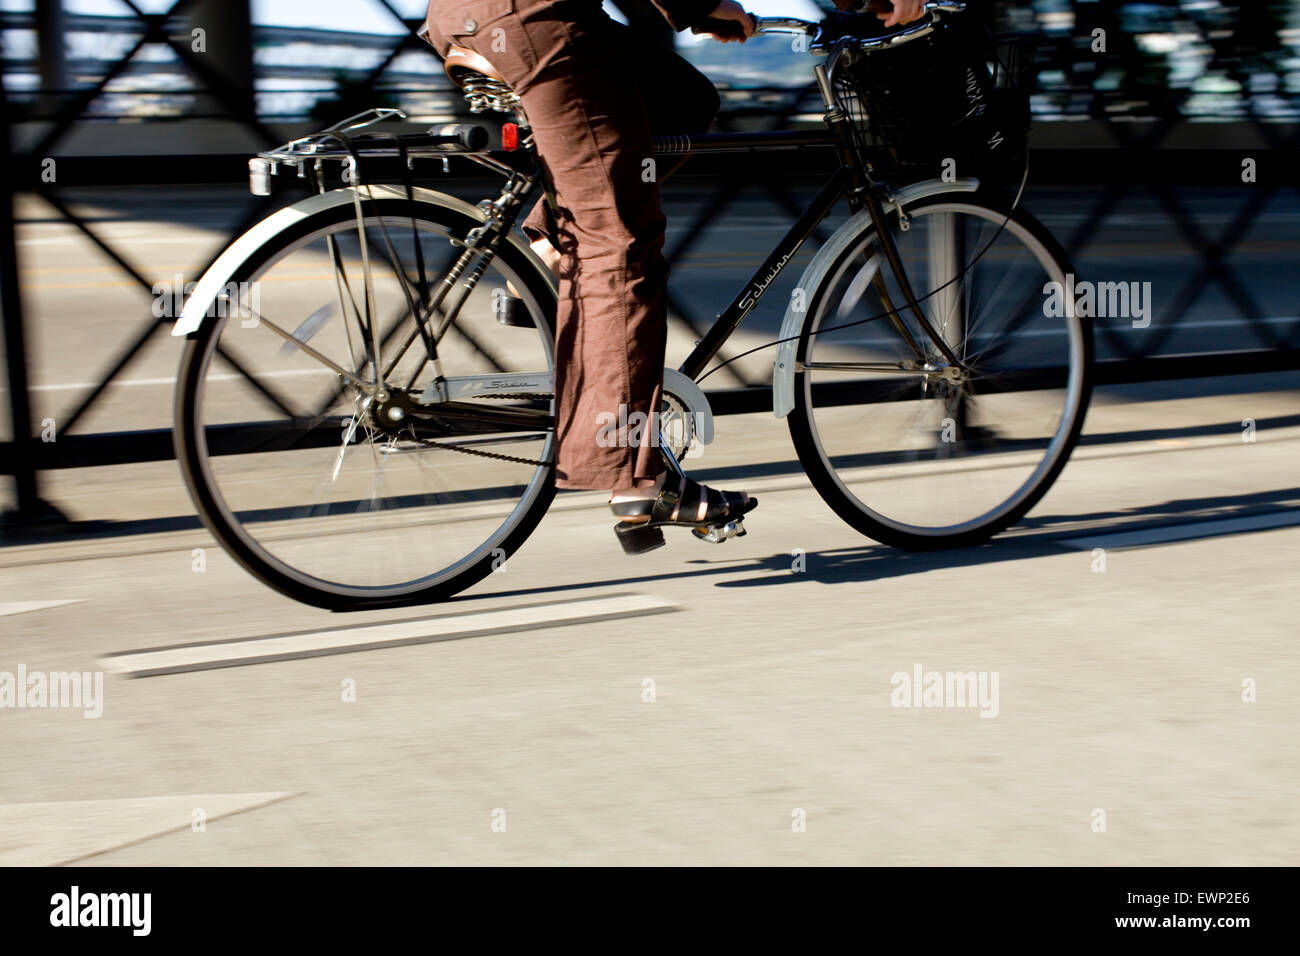 Abstract image of bike commuter in action Stock Photo